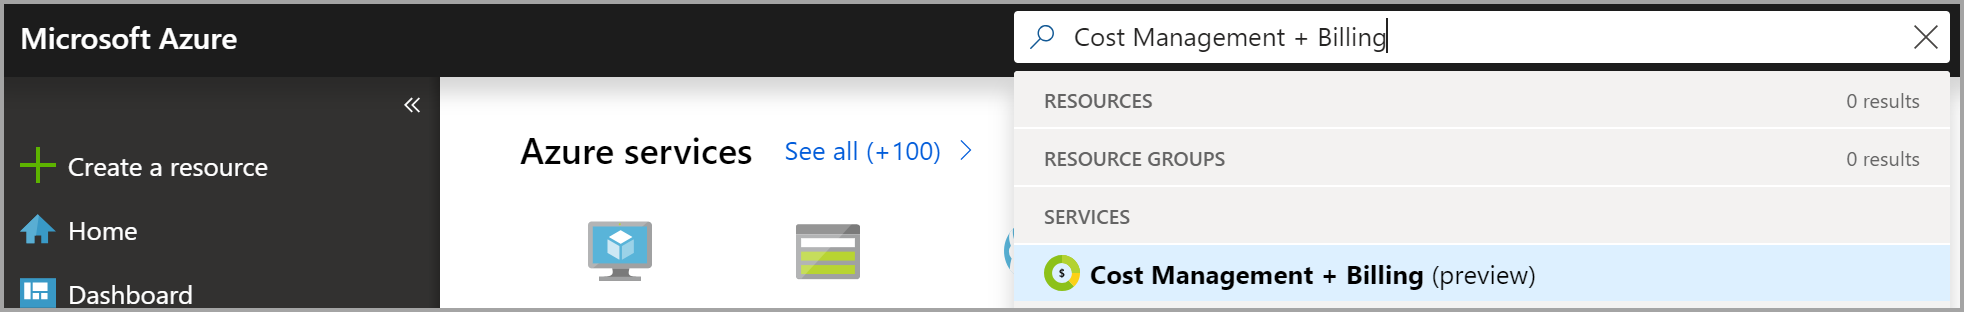 Screenshot showing Azure portal search for Cost Management + Billing.